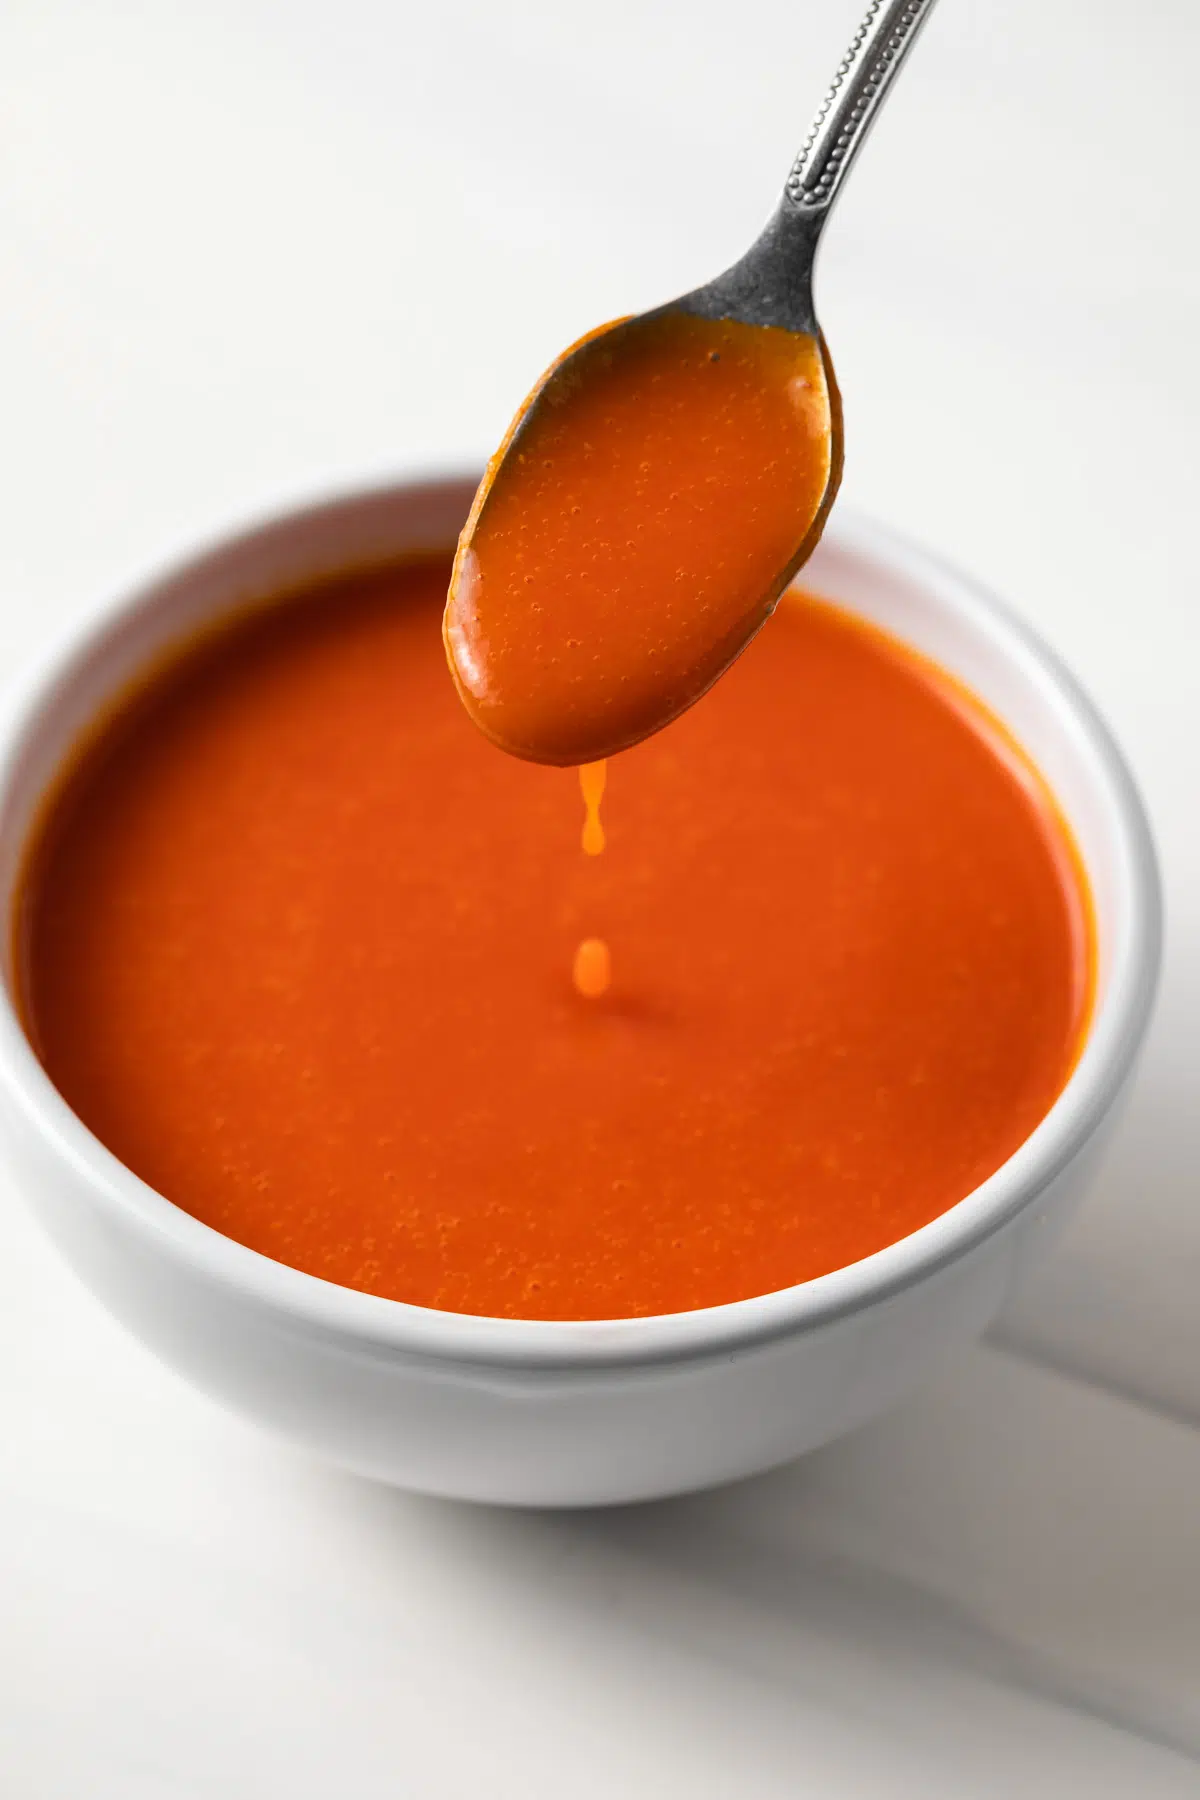 Cayenne pepper hot sauce dripping off a spoon in a white bowl.